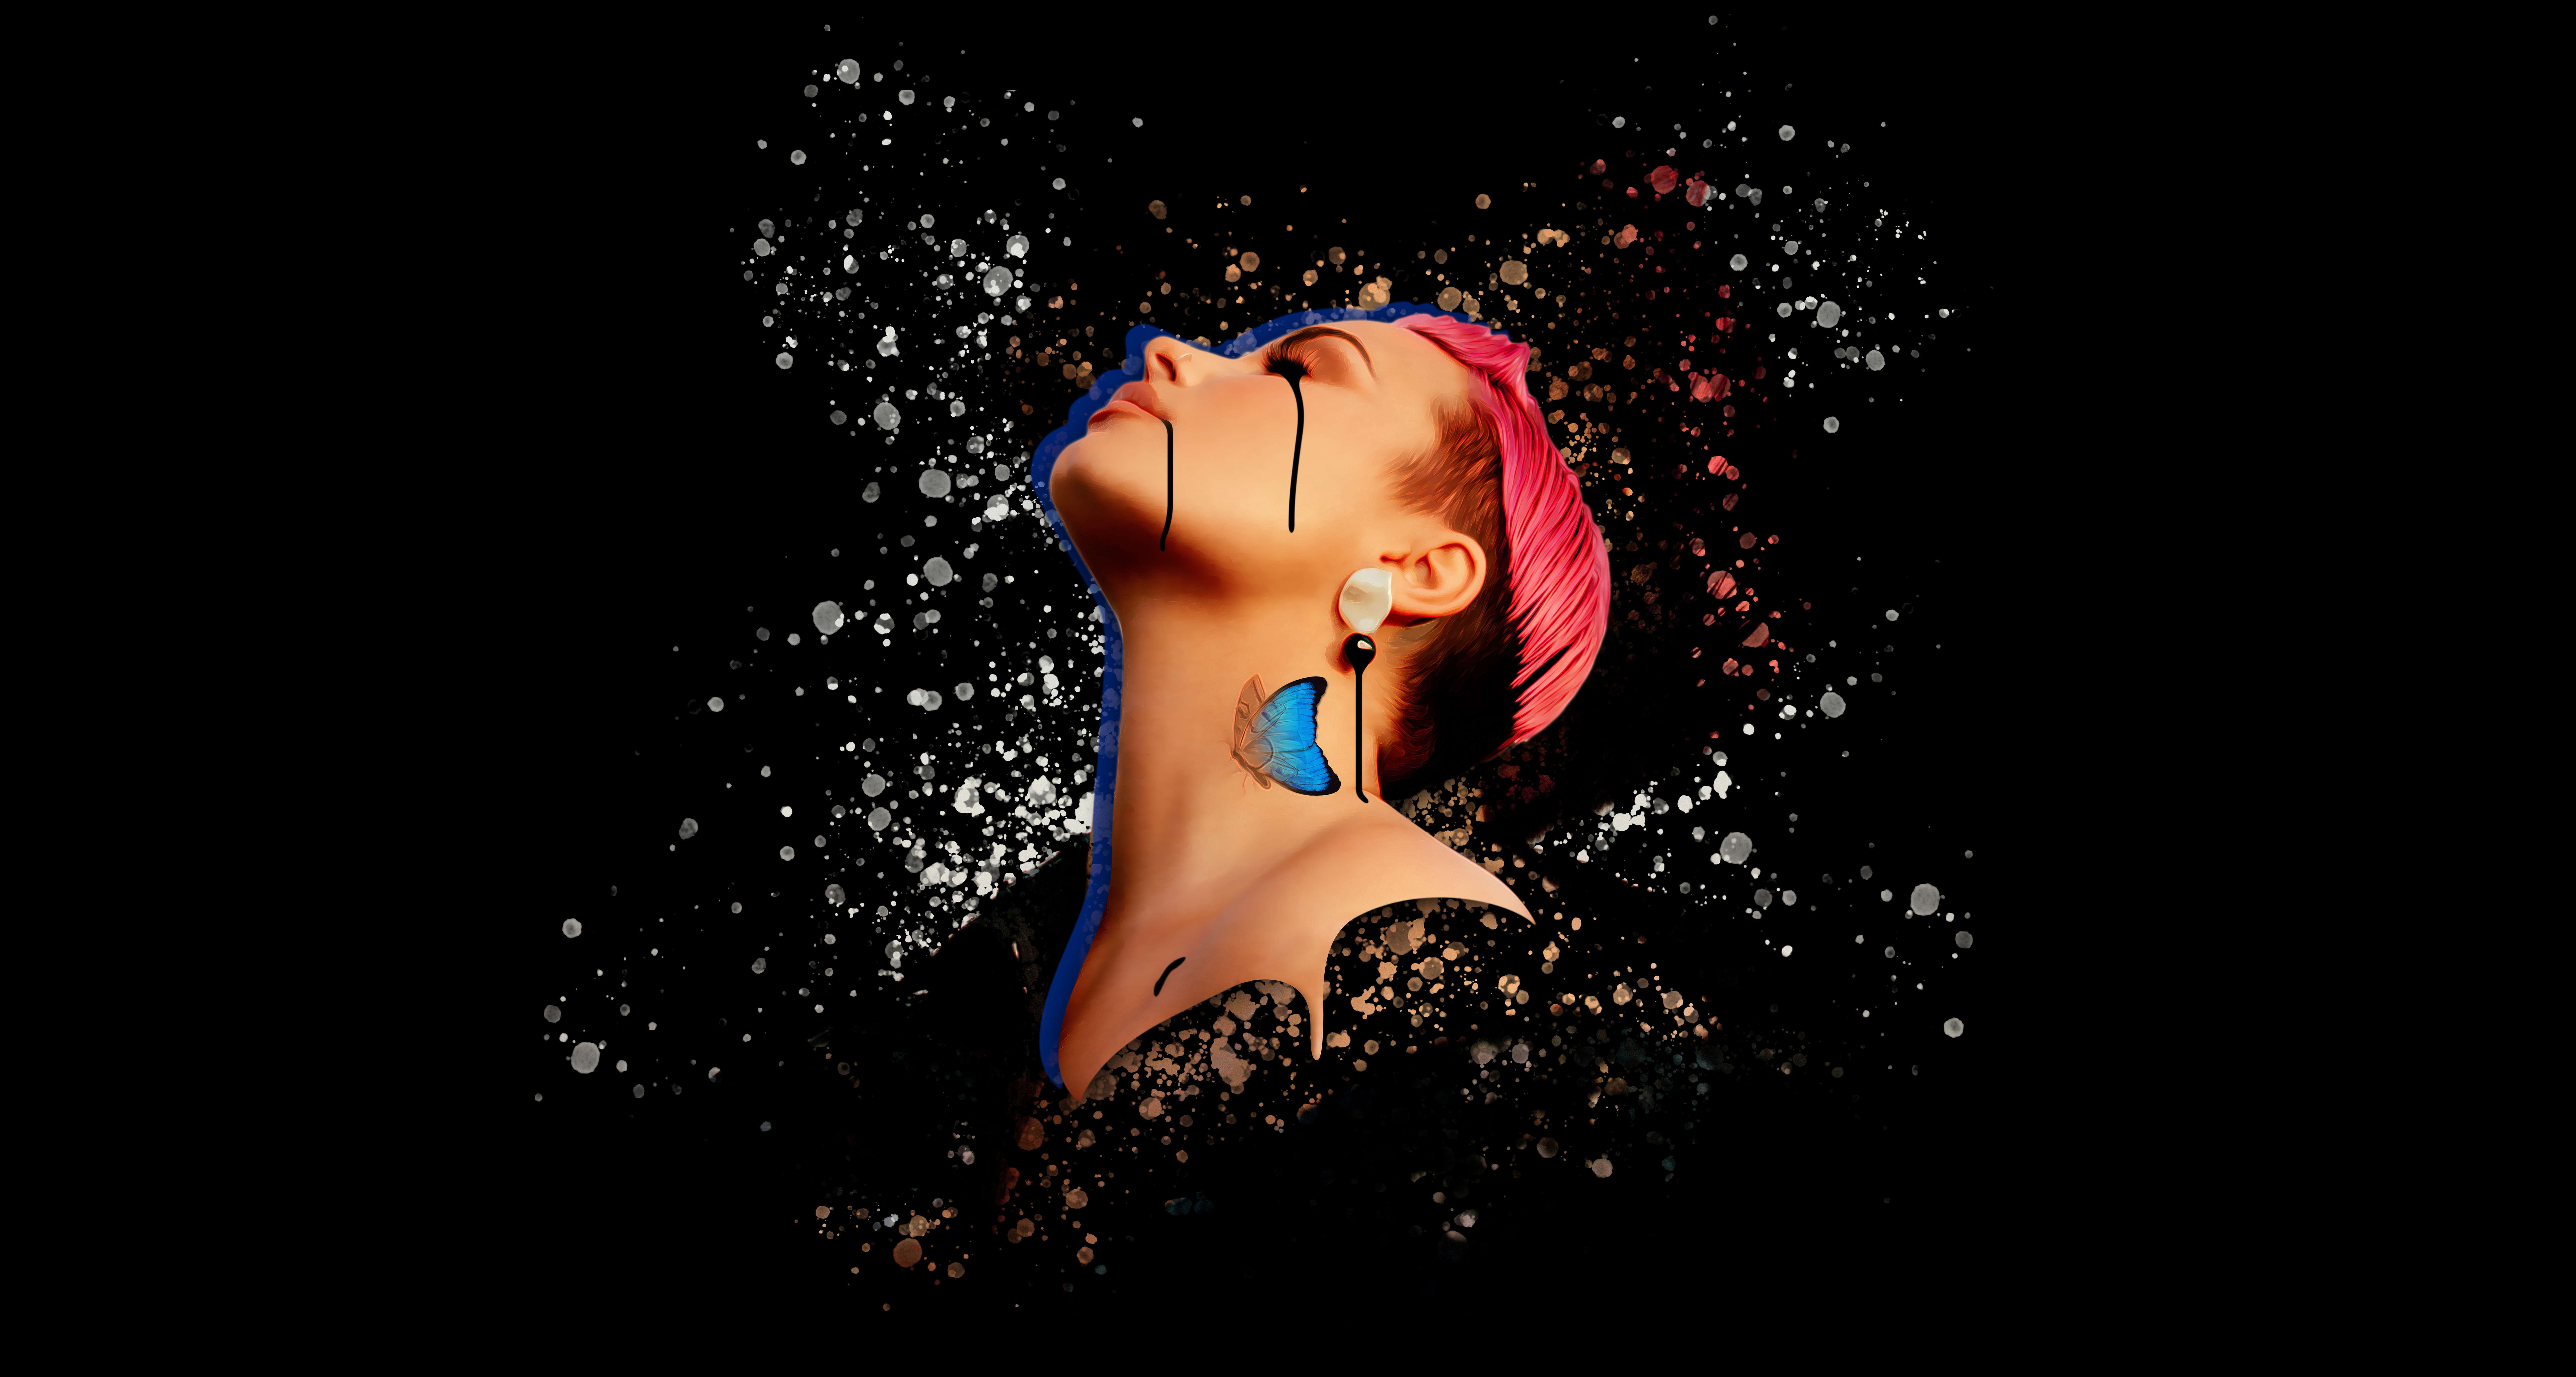 Demi Lovato Digital Abstract Illustration Celebrity Pink Hair Butterfly Tattoo 10976x5869